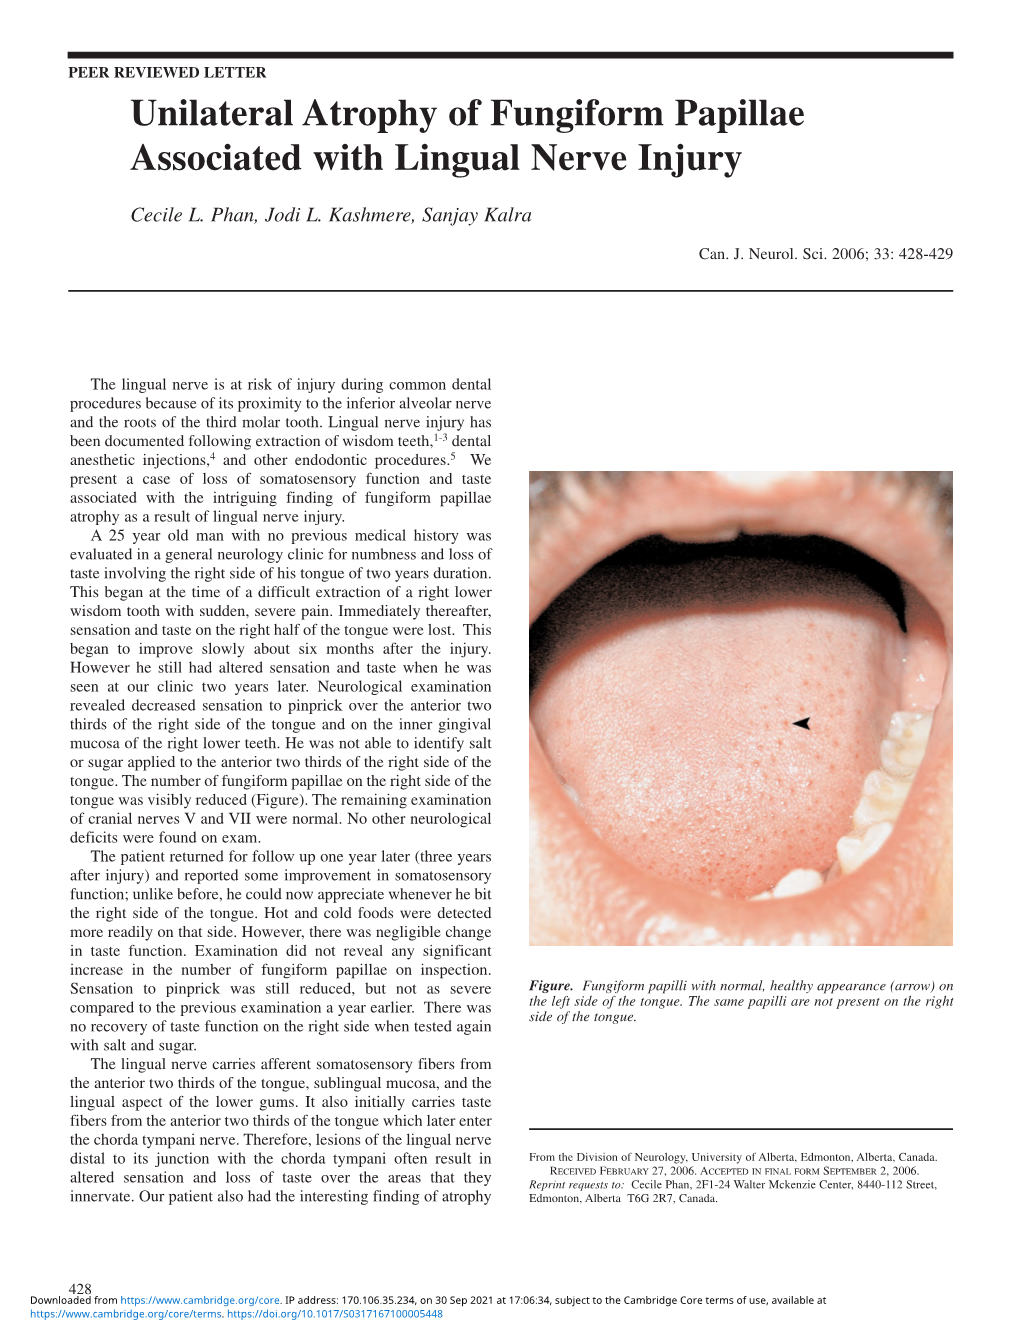 Unilateral Atrophy of Fungiform Papillae Associated with Lingual Nerve Injury